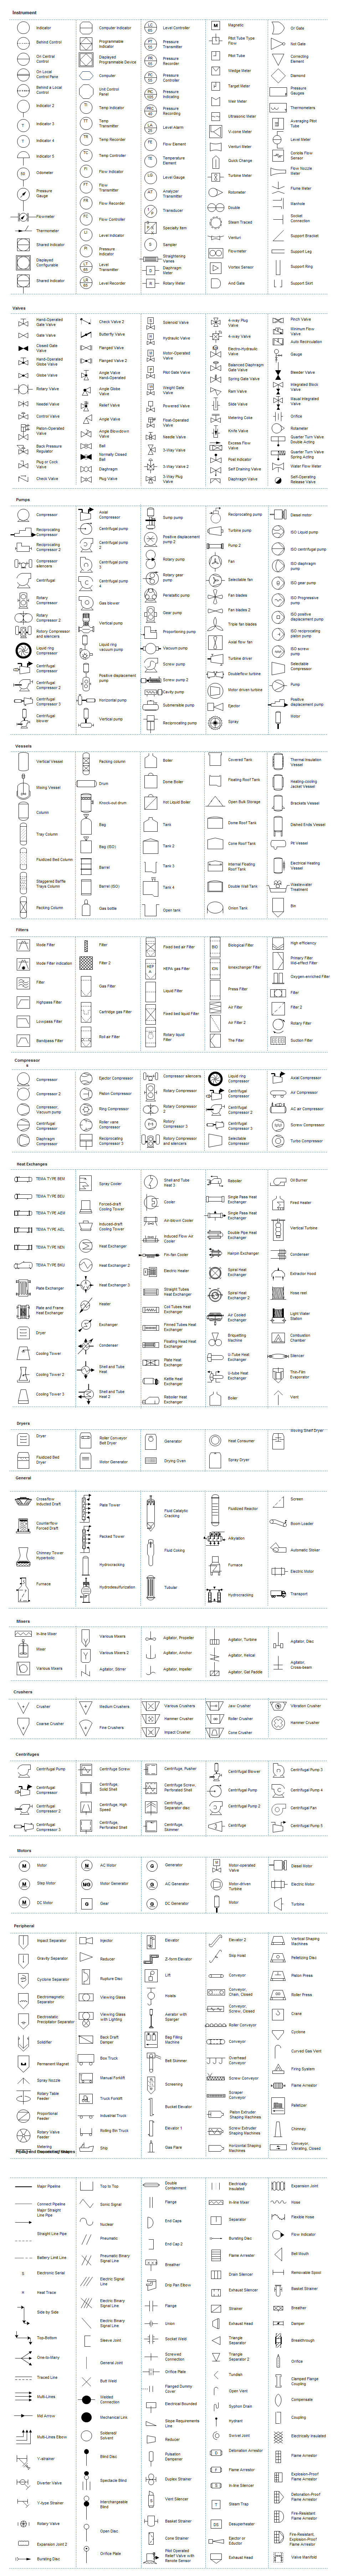 piping symbols for isometric drawing